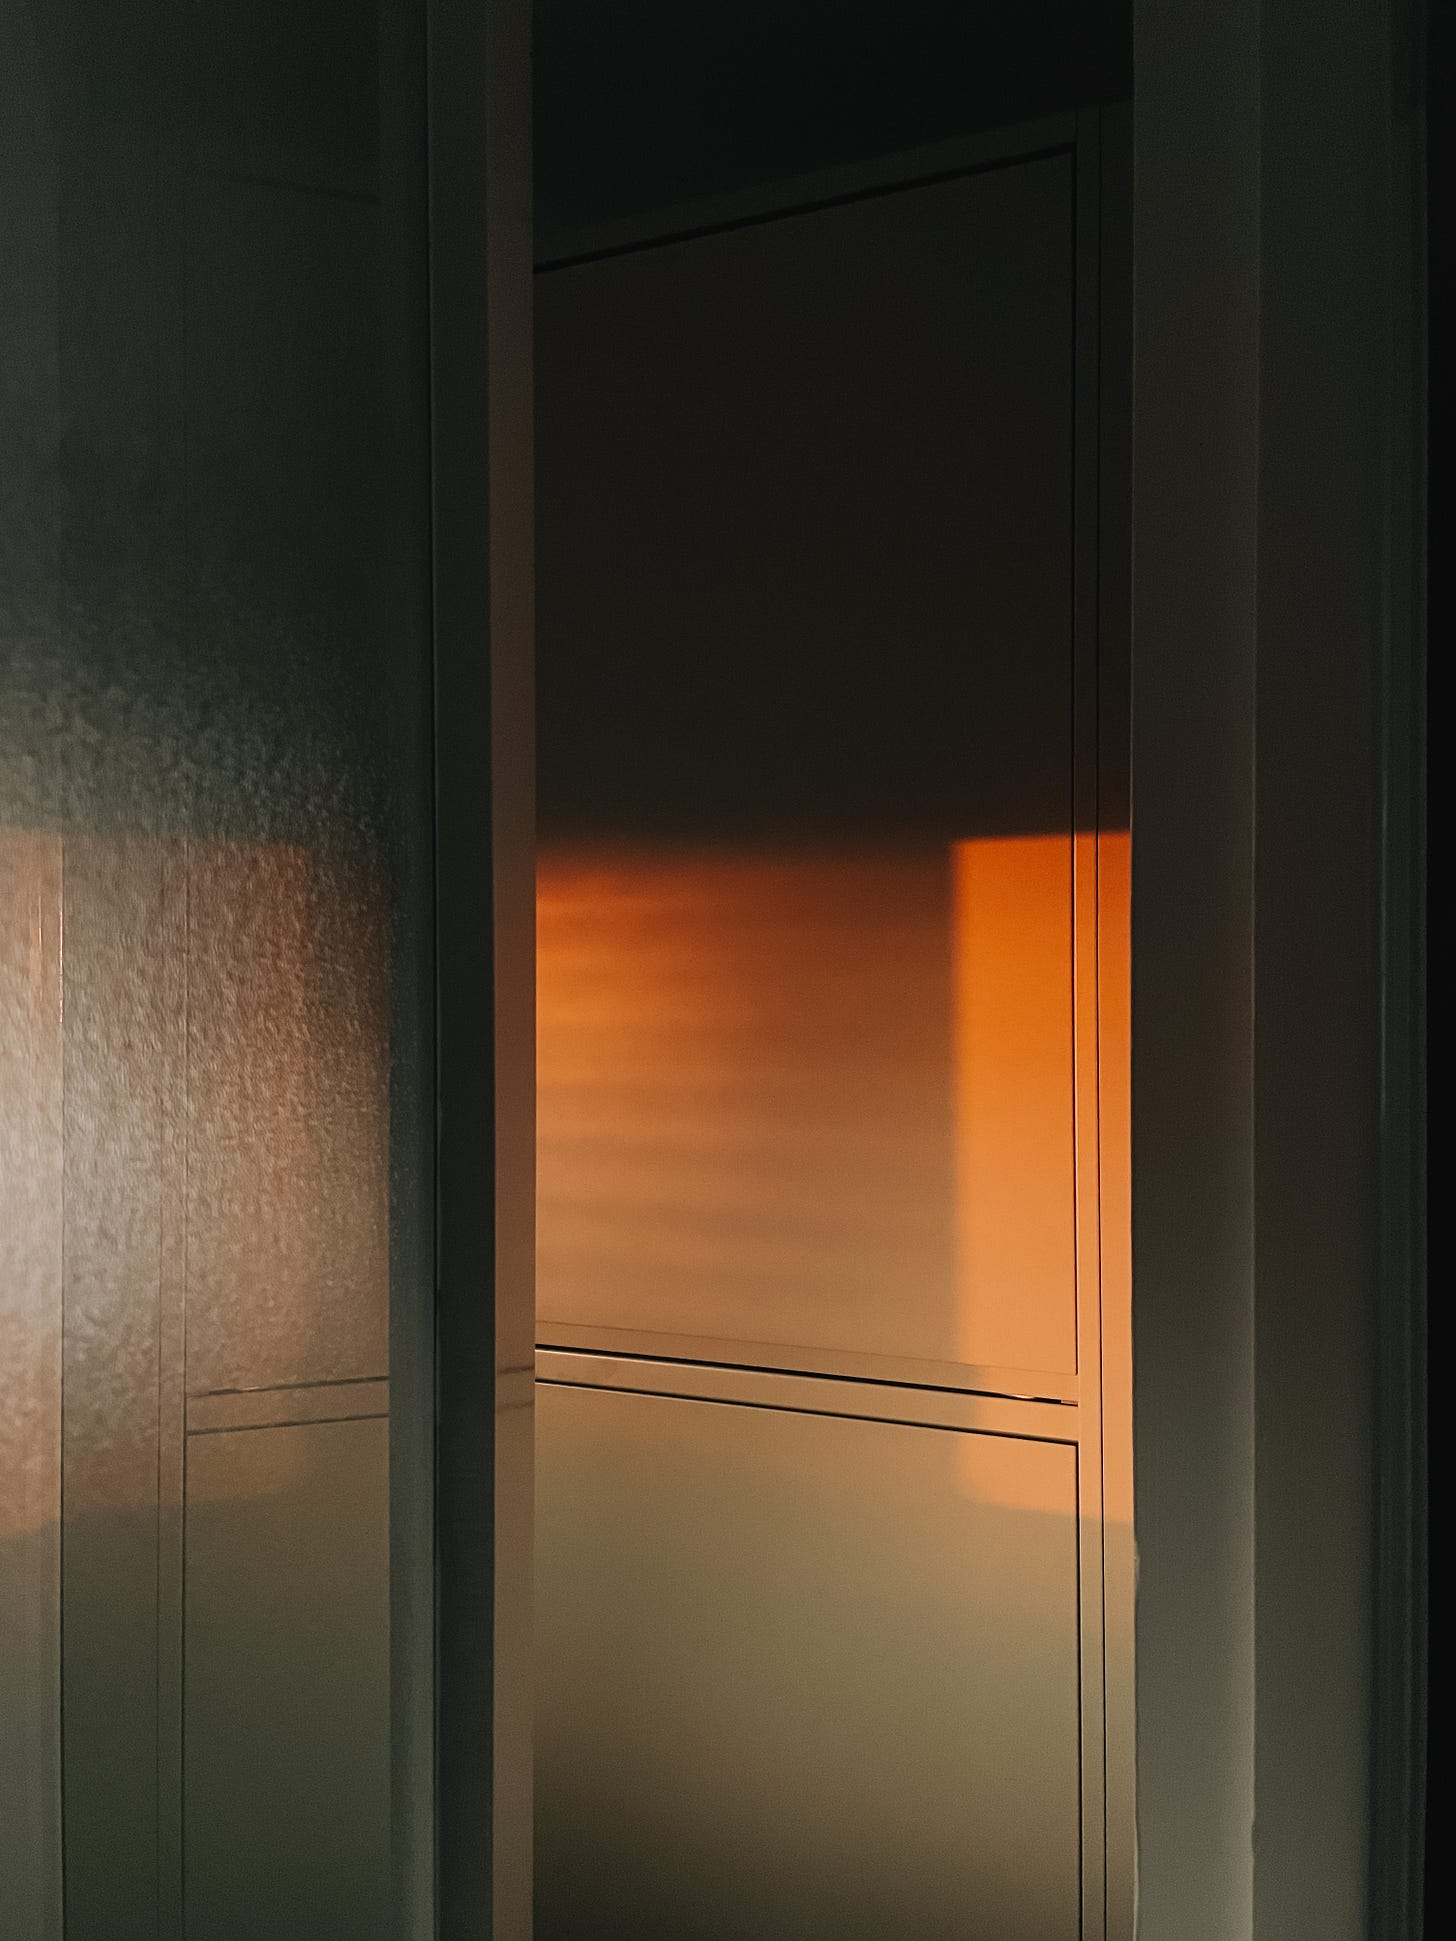 Early morning sunlight on kitchen cupboards seen through a doorway.